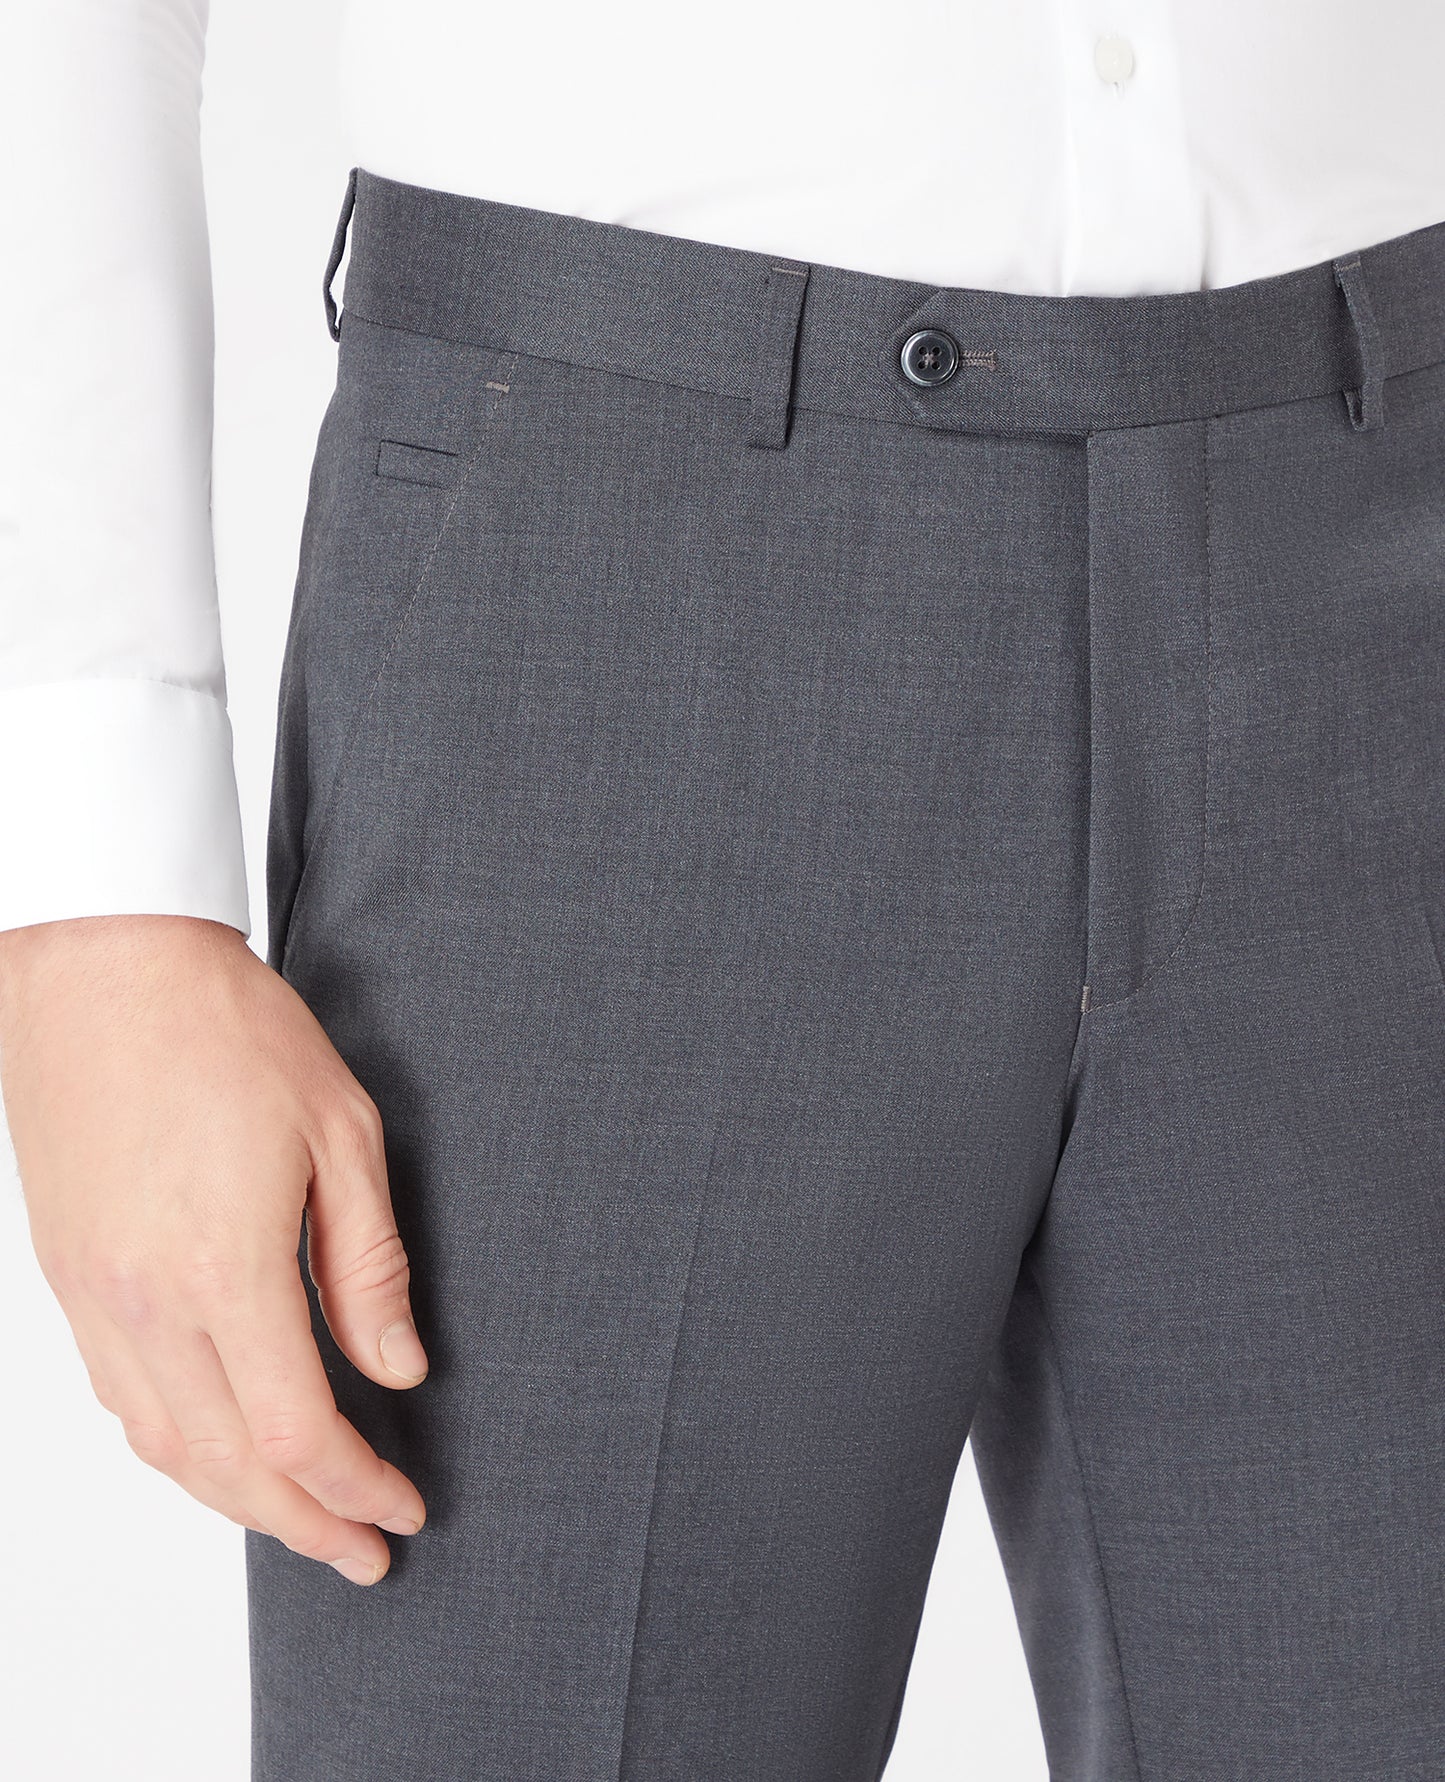 Slim Fit Wool-Rich Suit Trousers - Charcoal Grey